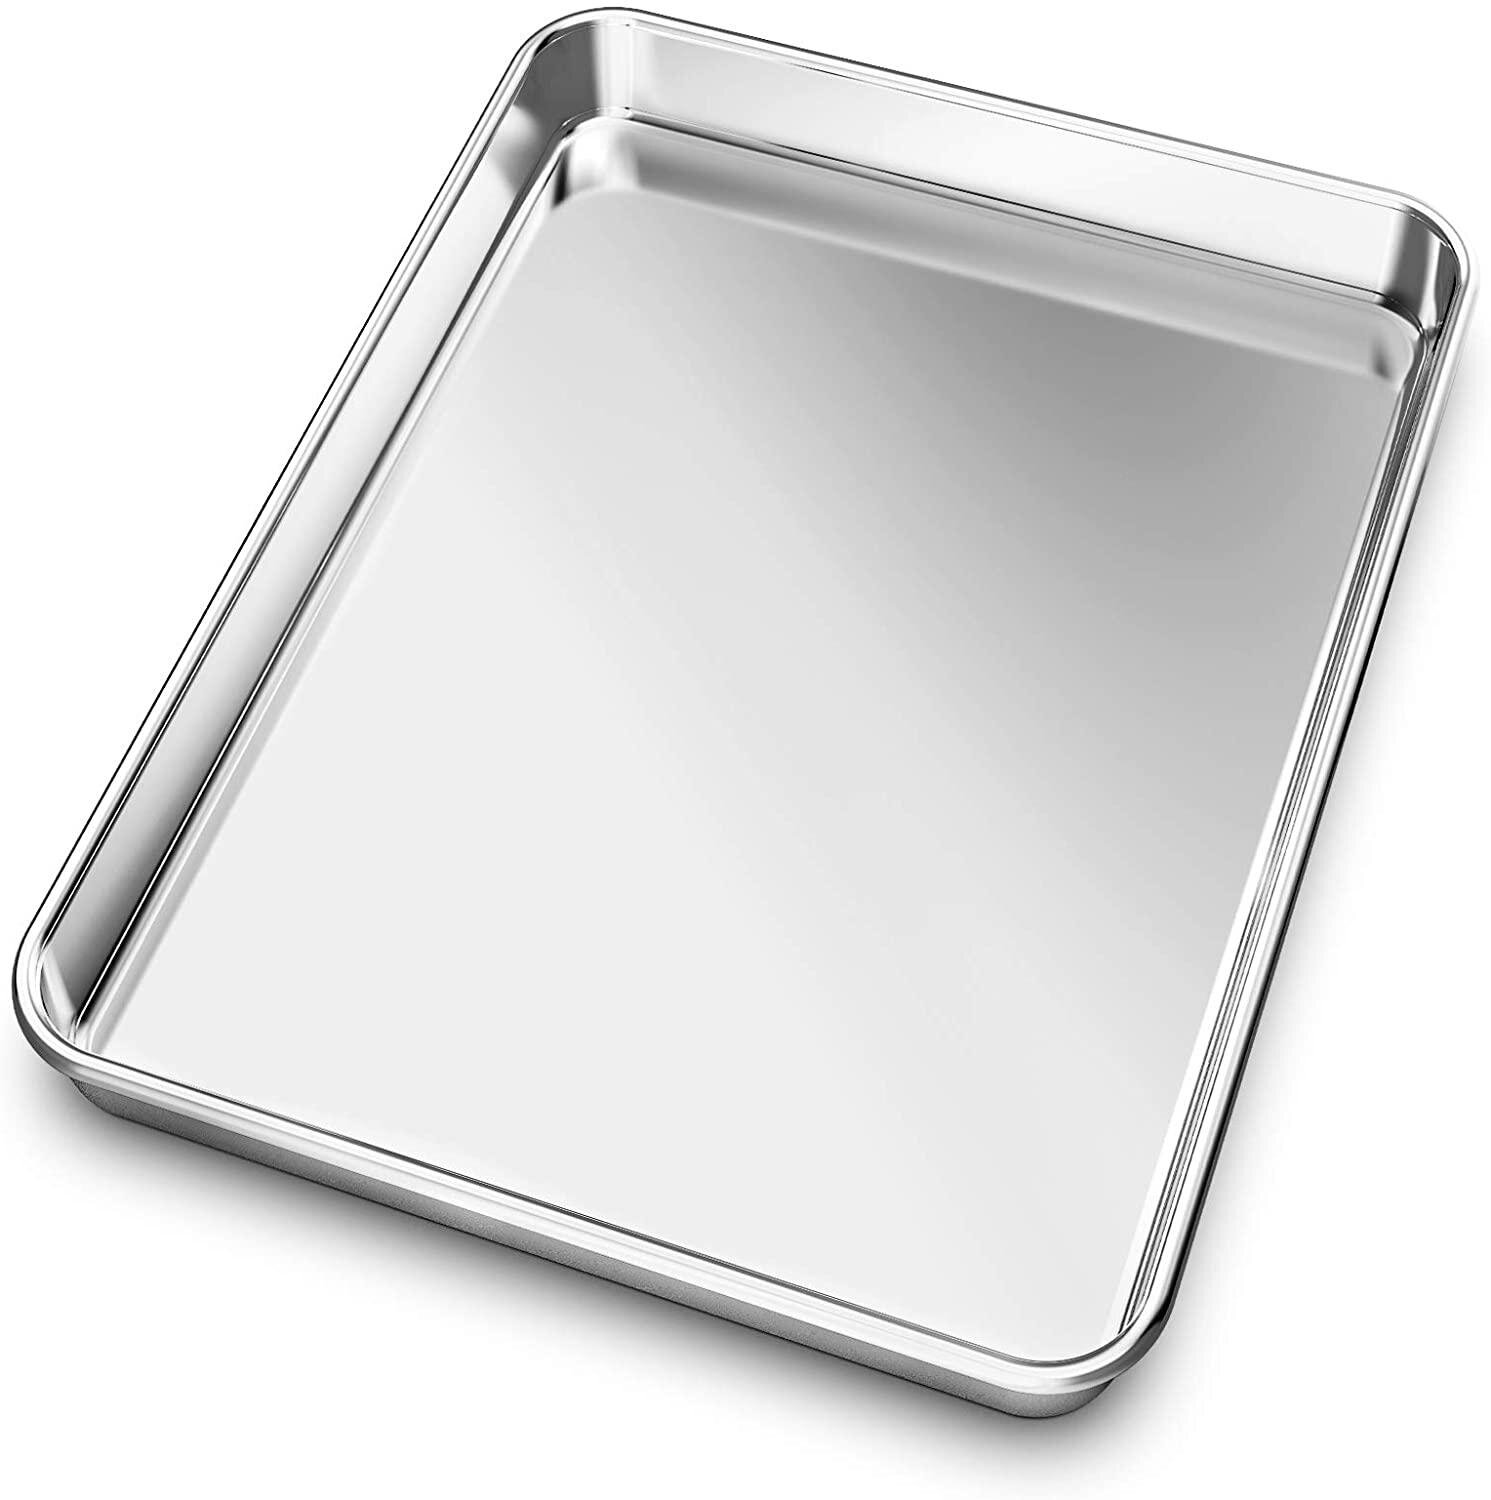 Set of 2 Small Stainless Steel Baking Sheet Pan for Cookie,Non Toxic&Healthy 